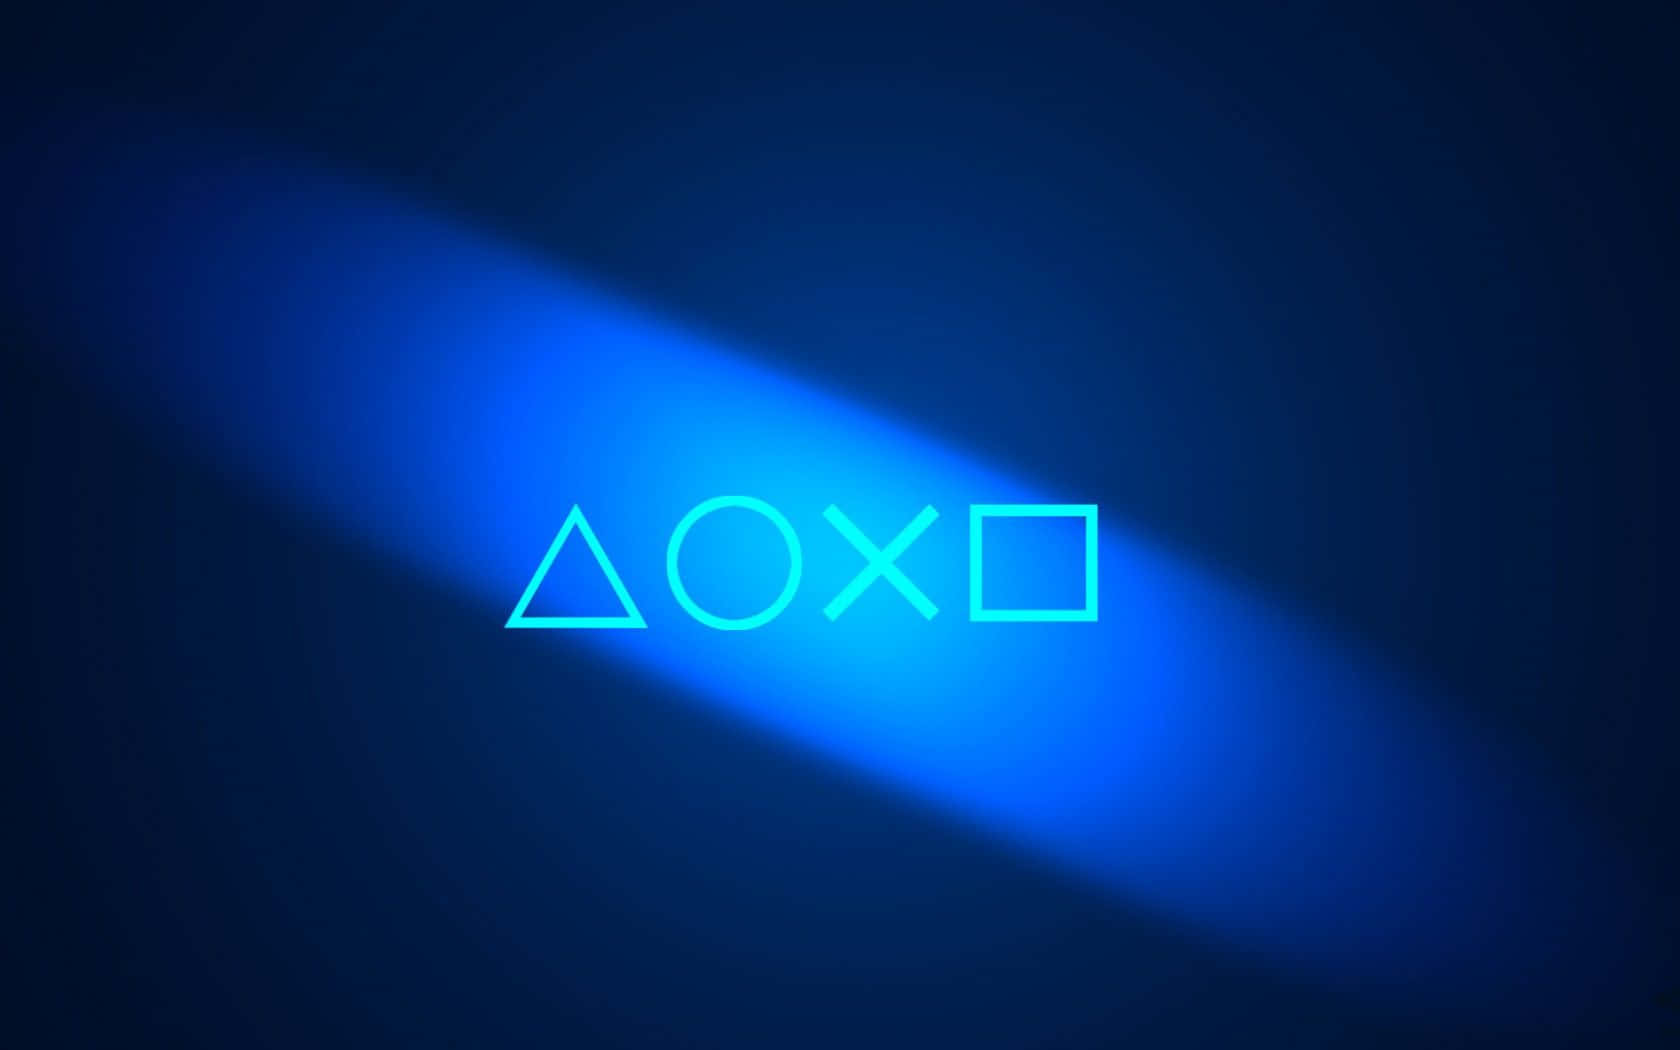 Cool Ps4 Controller Icon And Light Blue Oval Glow